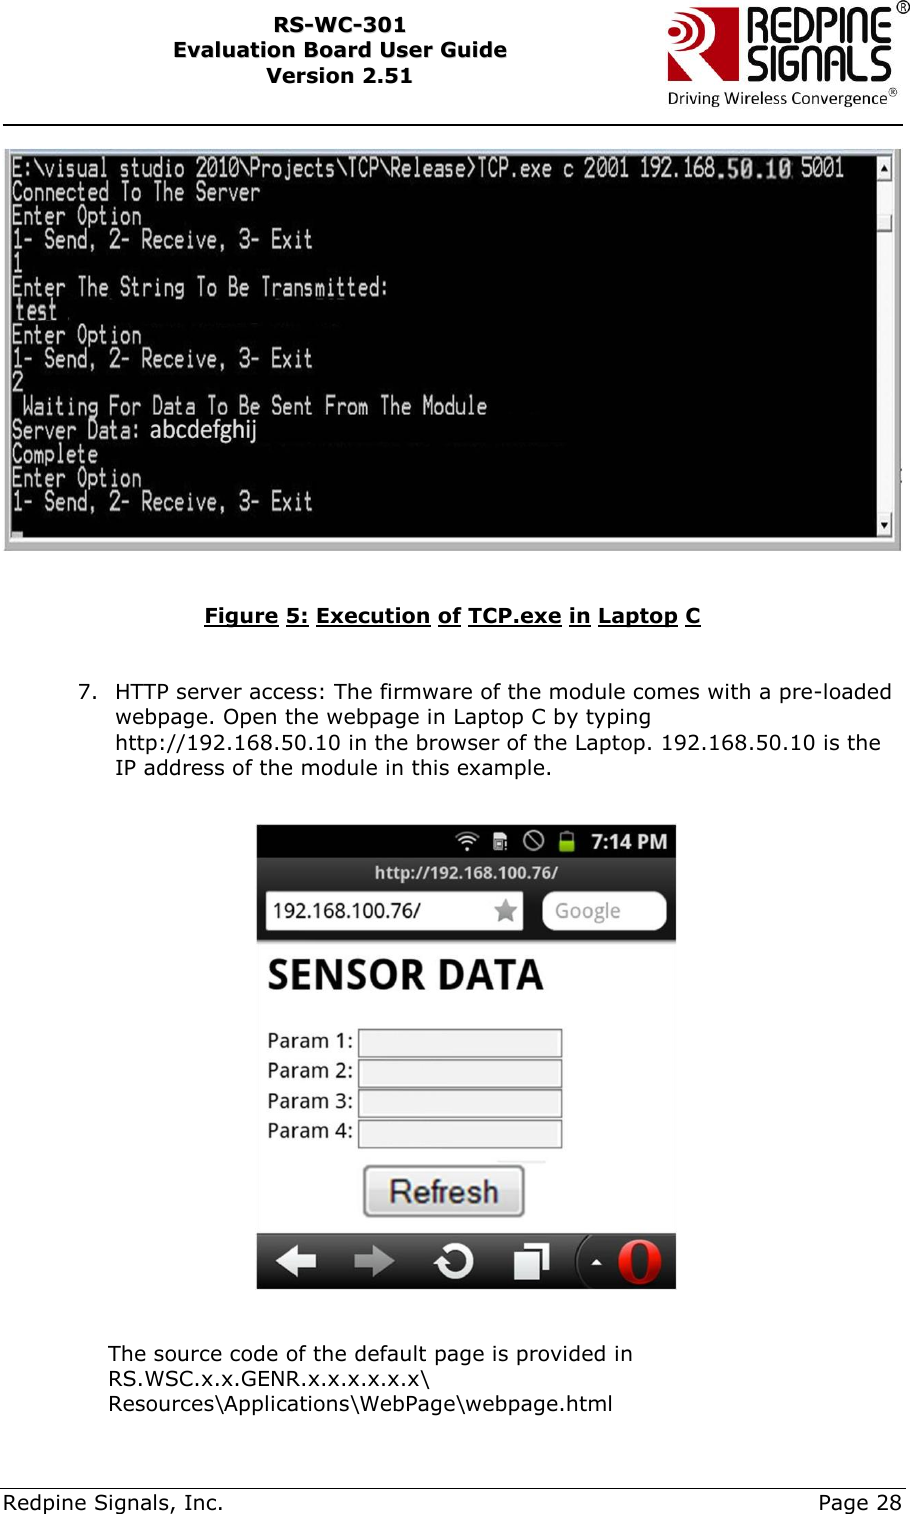     Redpine Signals, Inc.     Page 28 RRSS--WWCC--330011    EEvvaalluuaattiioonn  BBooaarrdd  UUsseerr  GGuuiiddee  VVeerrssiioonn  22..5511      Figure 5: Execution of TCP.exe in Laptop C   7. HTTP server access: The firmware of the module comes with a pre-loaded webpage. Open the webpage in Laptop C by typing http://192.168.50.10 in the browser of the Laptop. 192.168.50.10 is the IP address of the module in this example.    The source code of the default page is provided in RS.WSC.x.x.GENR.x.x.x.x.x.x\ Resources\Applications\WebPage\webpage.html 